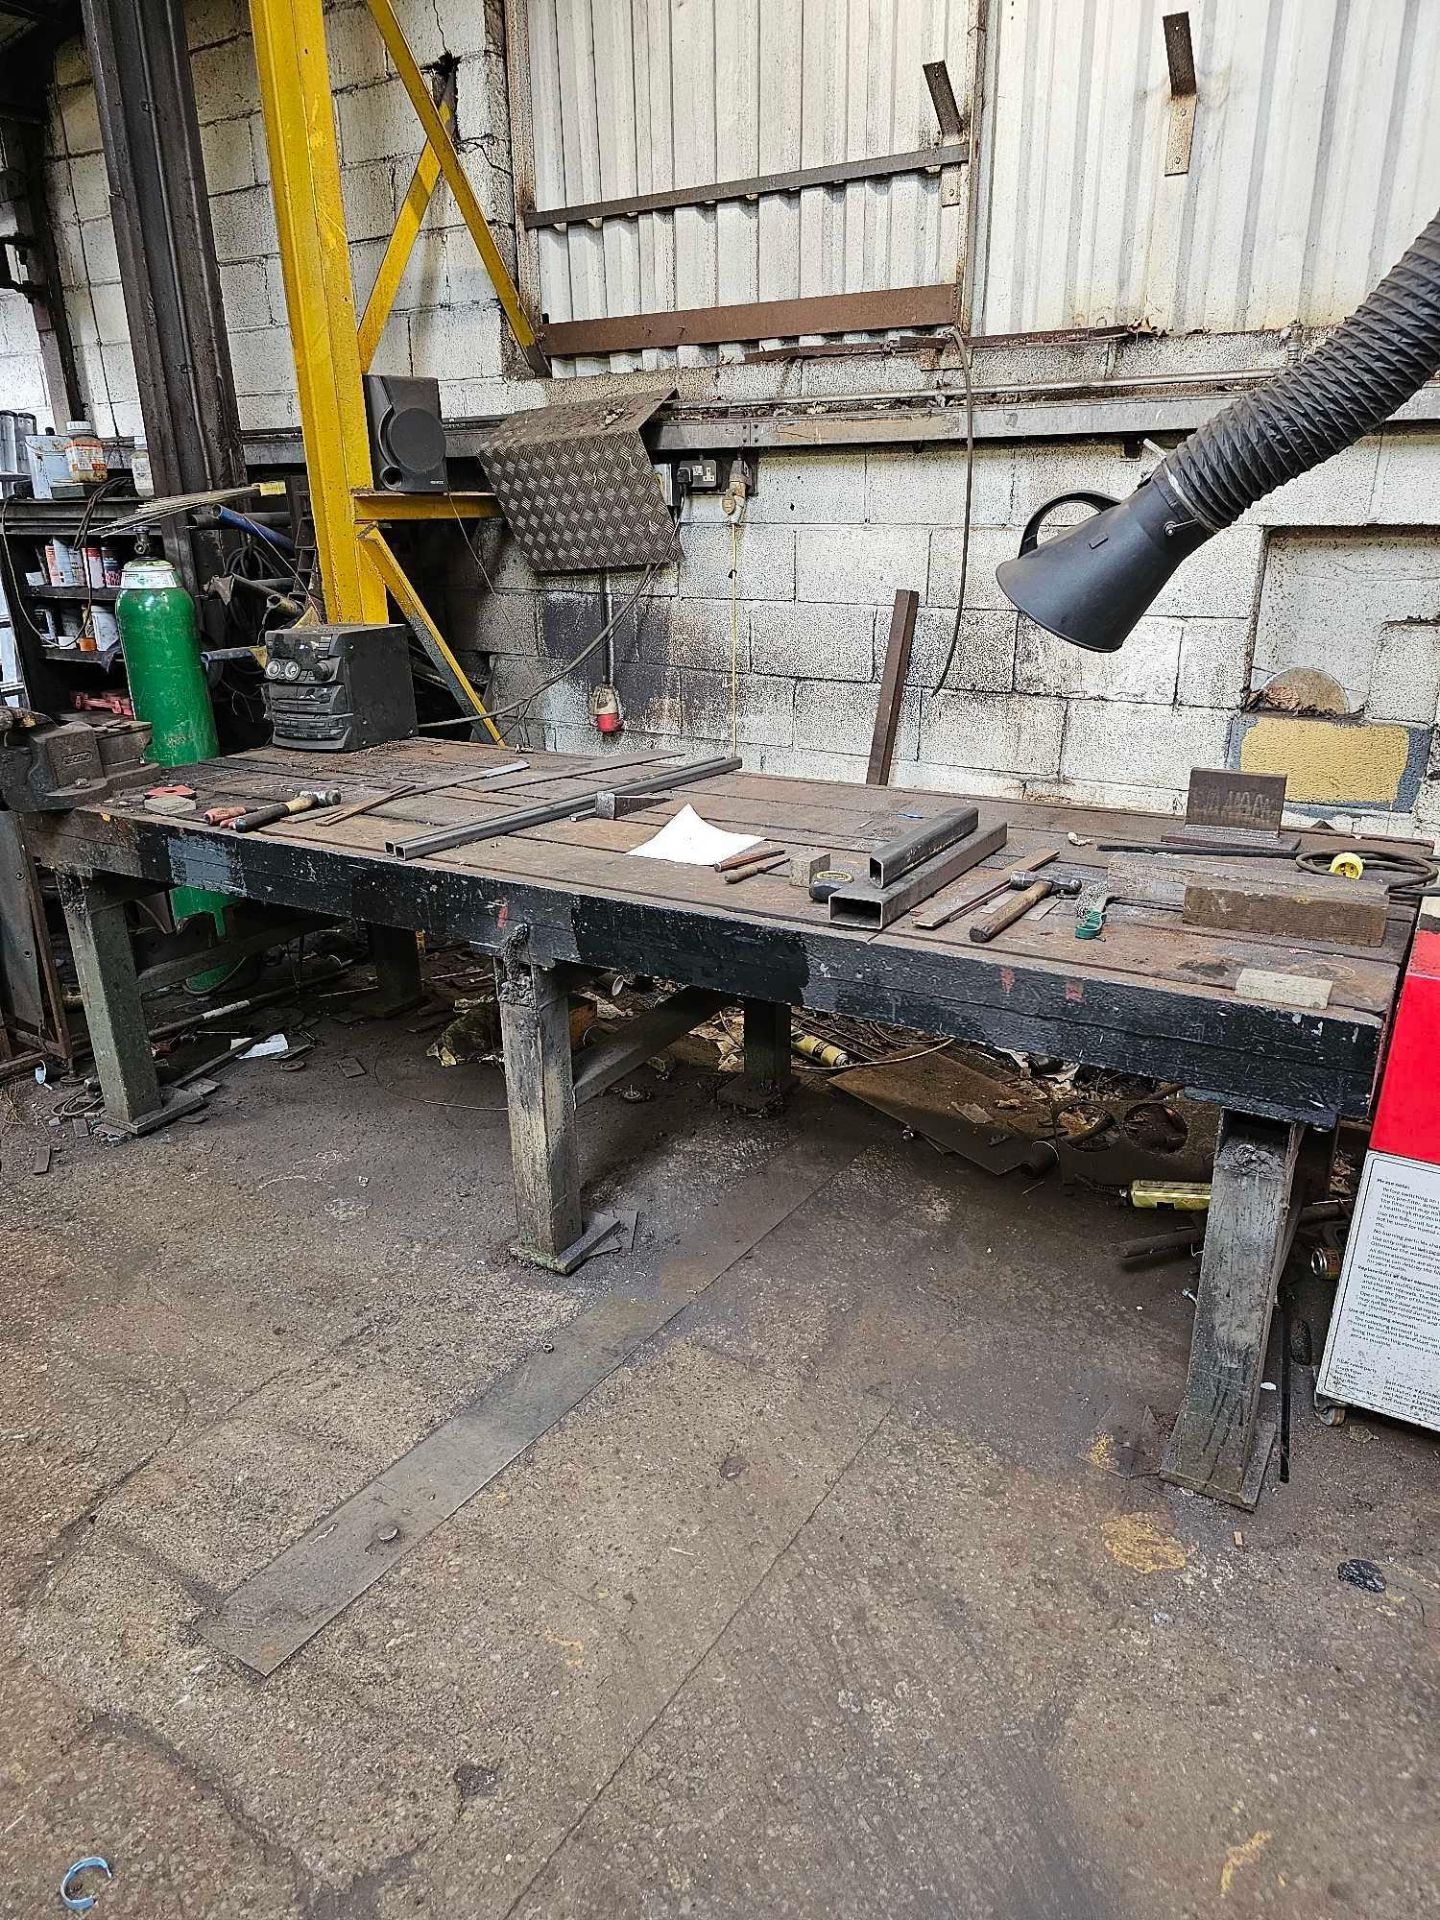 Cast Steel Engineers Marking Out Work Bench 305 x 110 x 89cm Weight 1600kg - Image 2 of 5